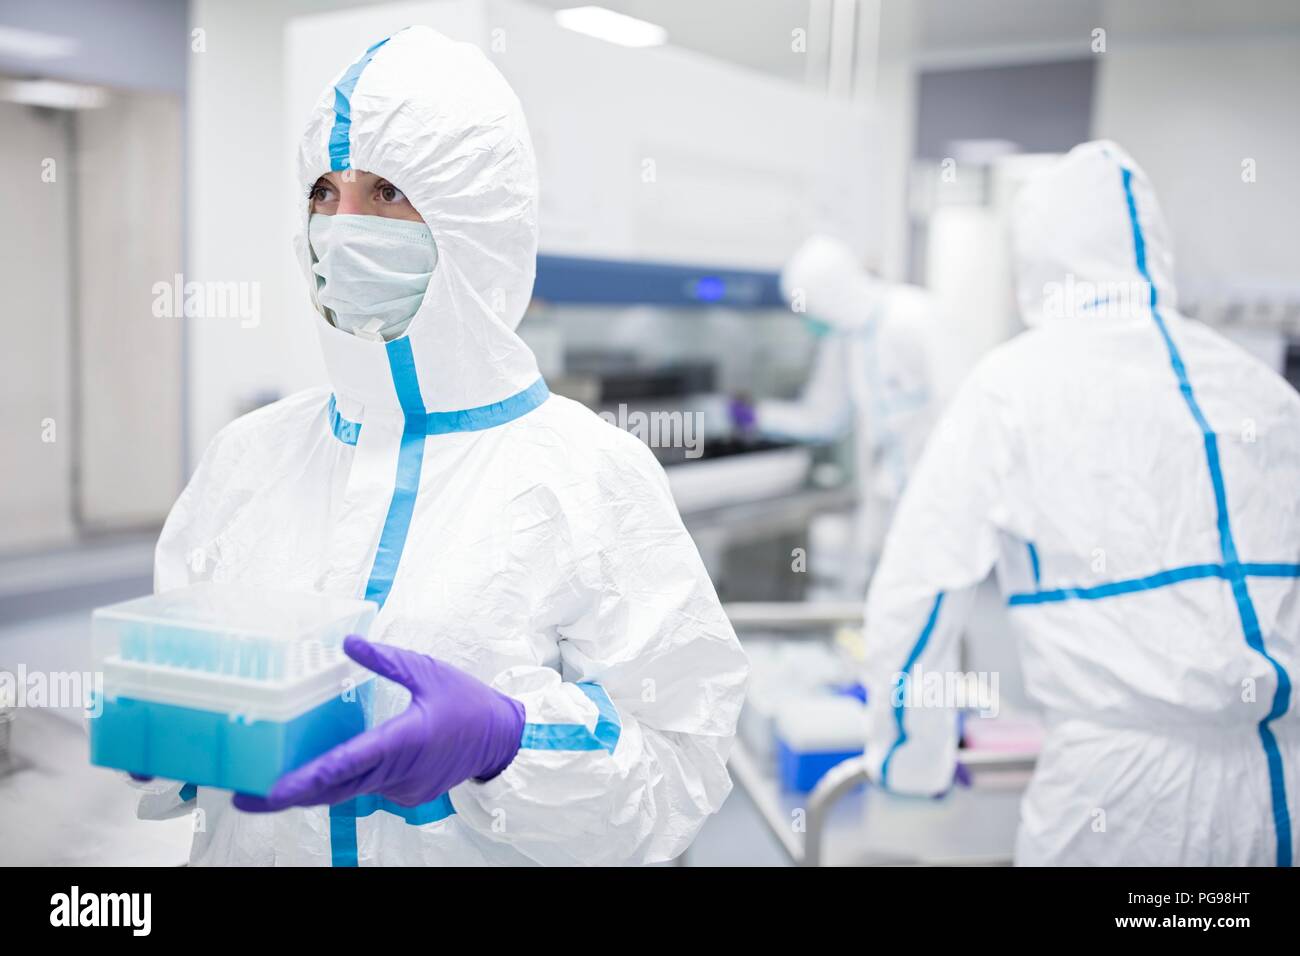 Technician holding cell samples in in a laboratory that engineers human tissues for implant. Such implants include bone and skin grafts. Stock Photo